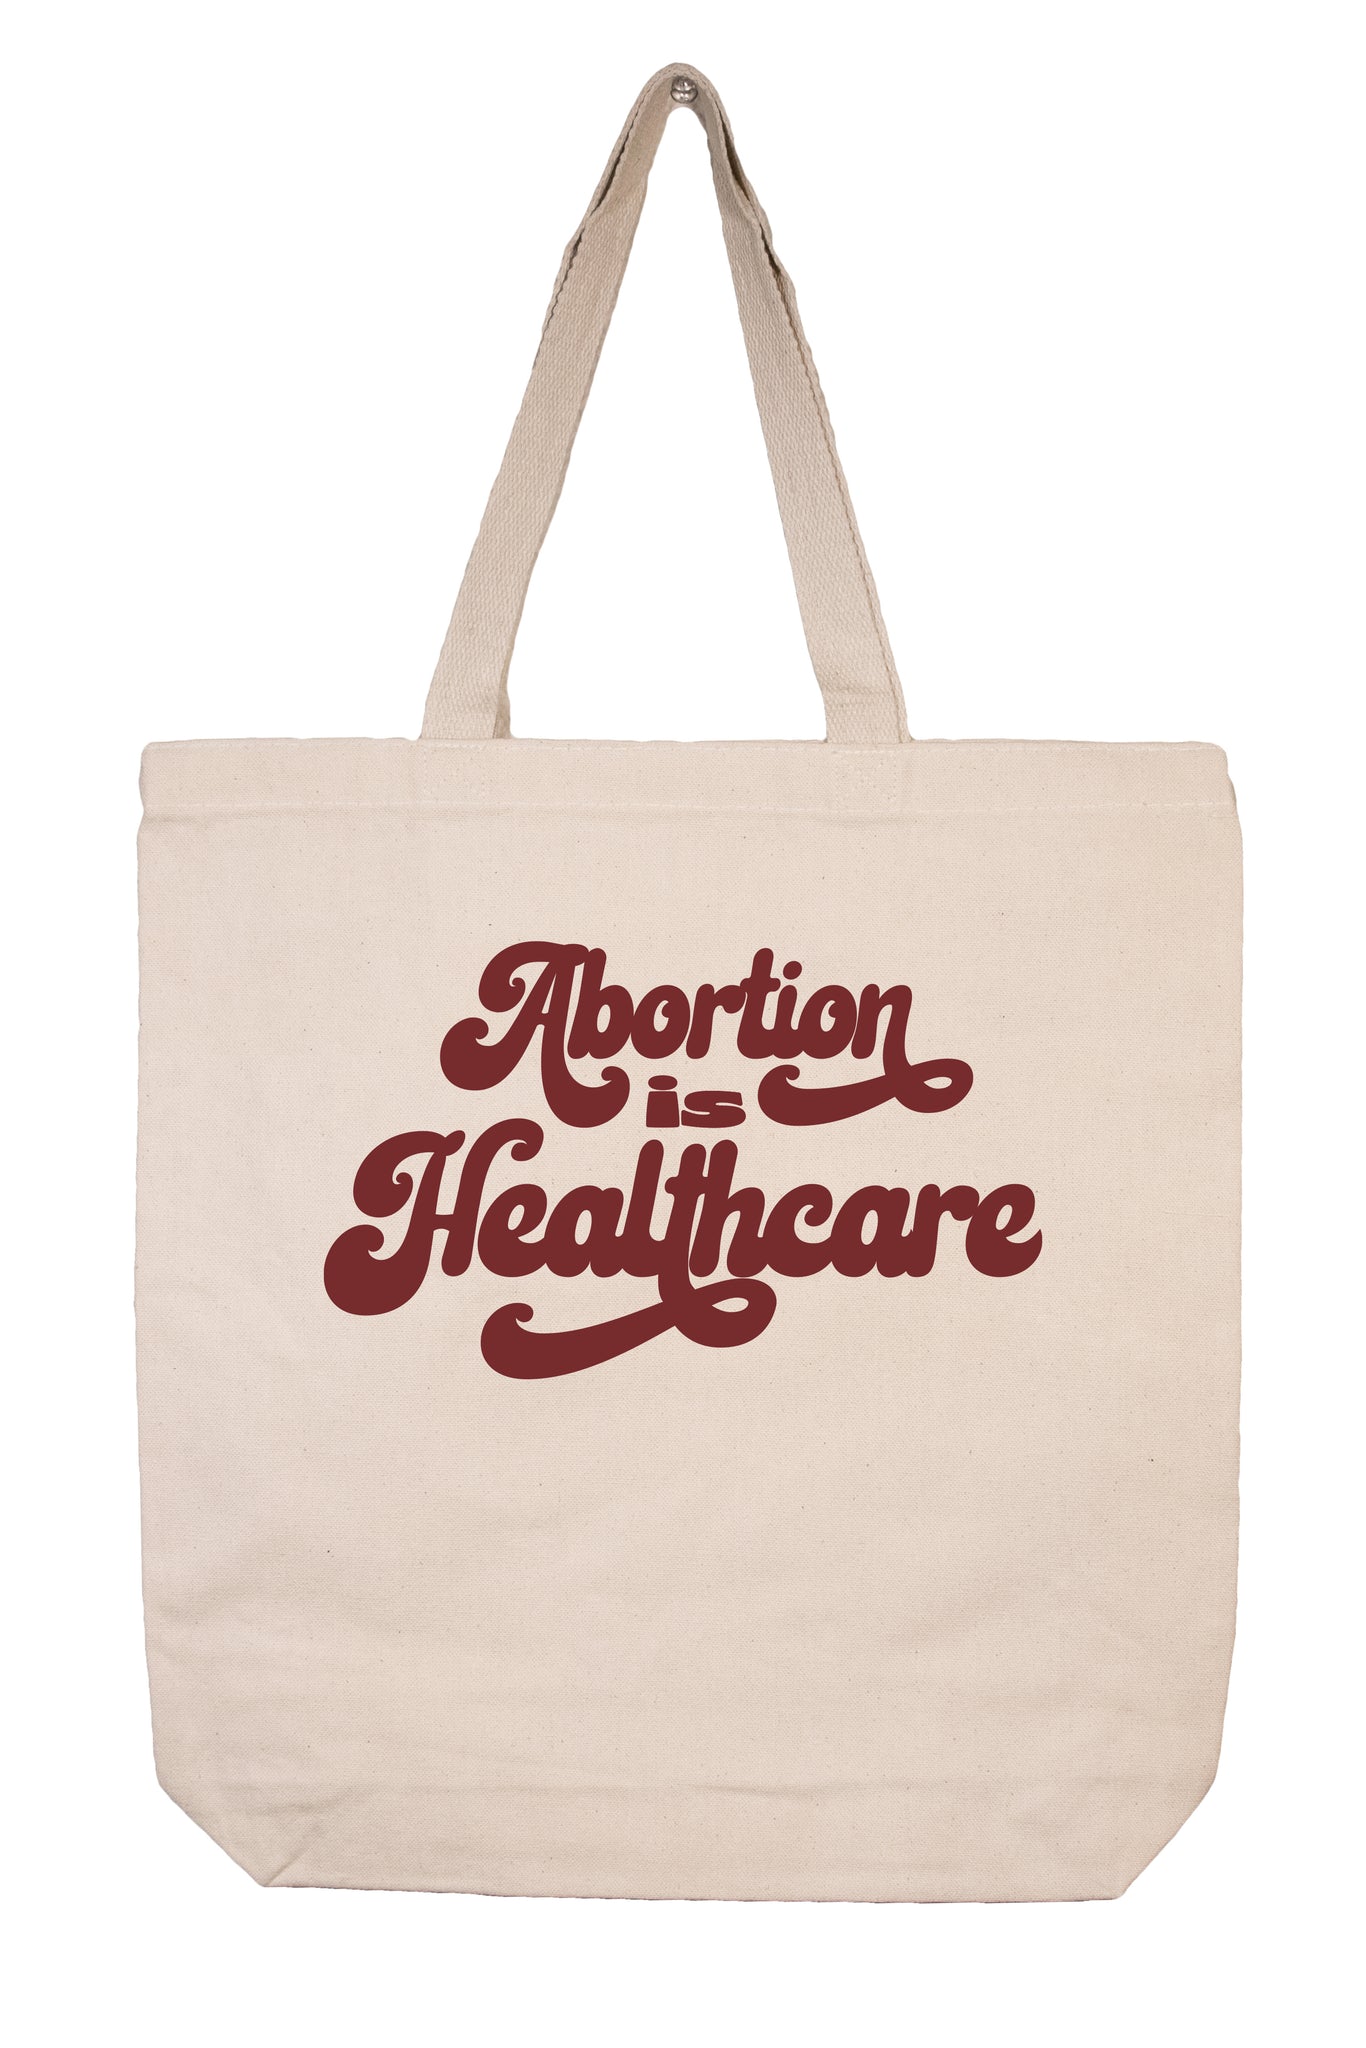 Abortion Is Healthcare Tote